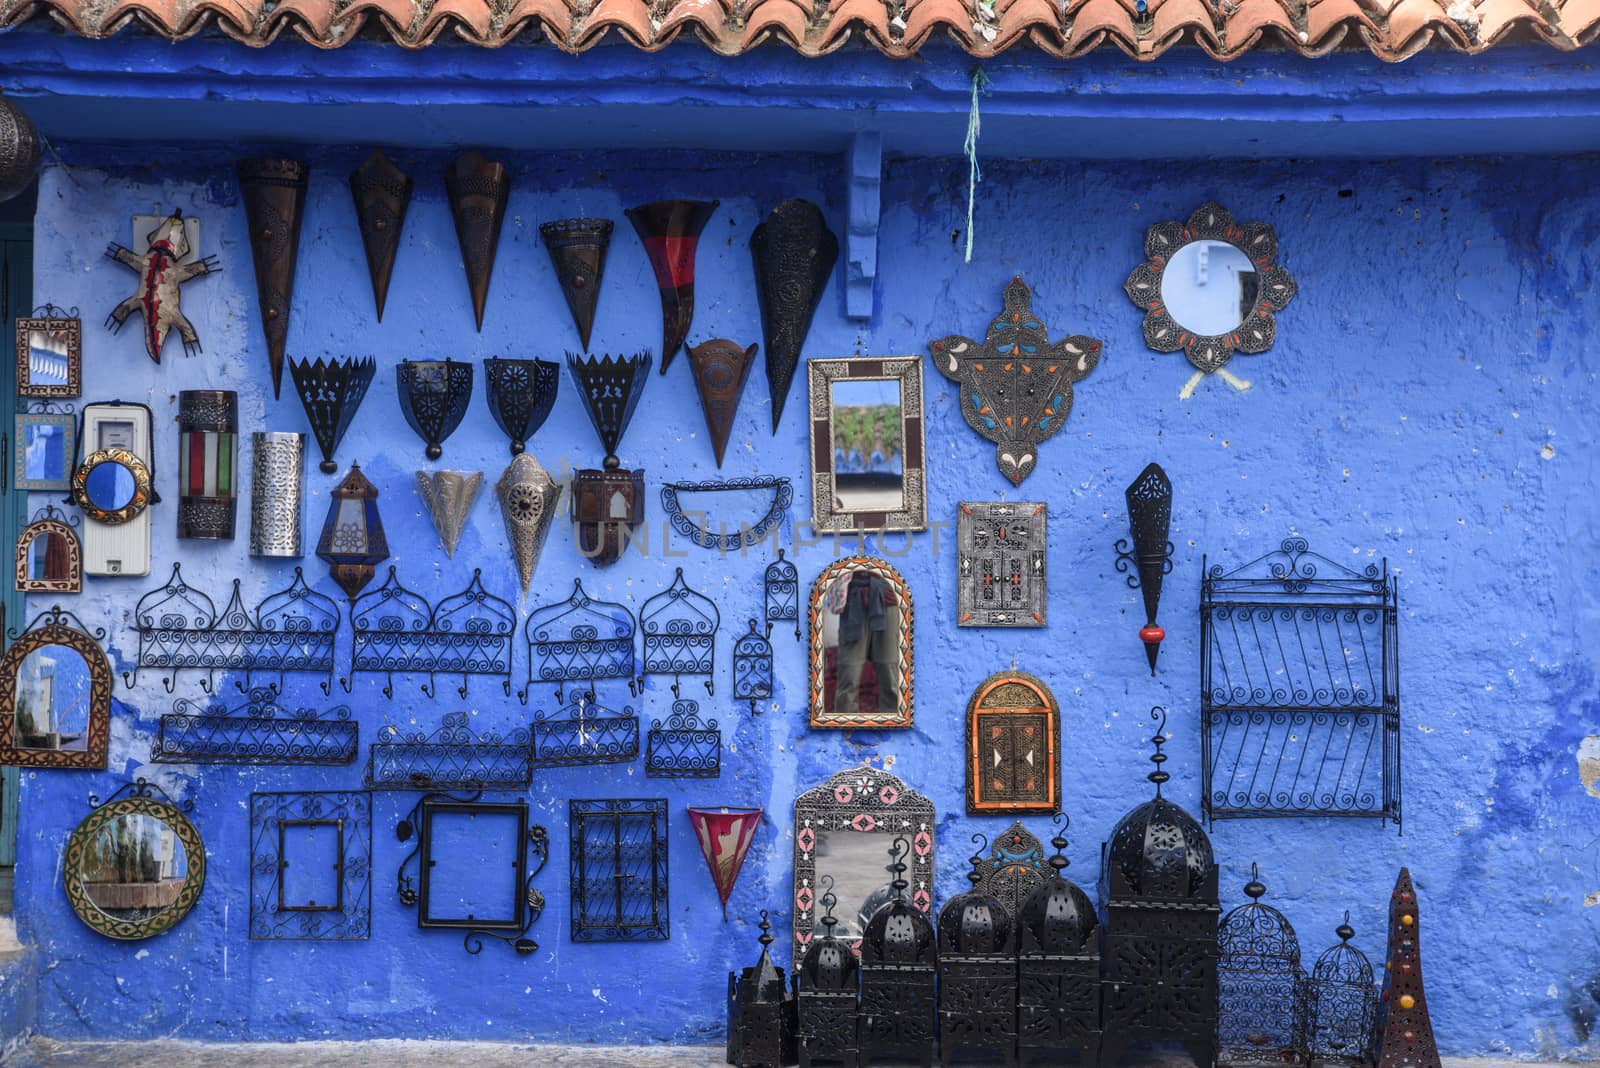 Chefchaouen, the blue city in the Morocco. by johnnychaos